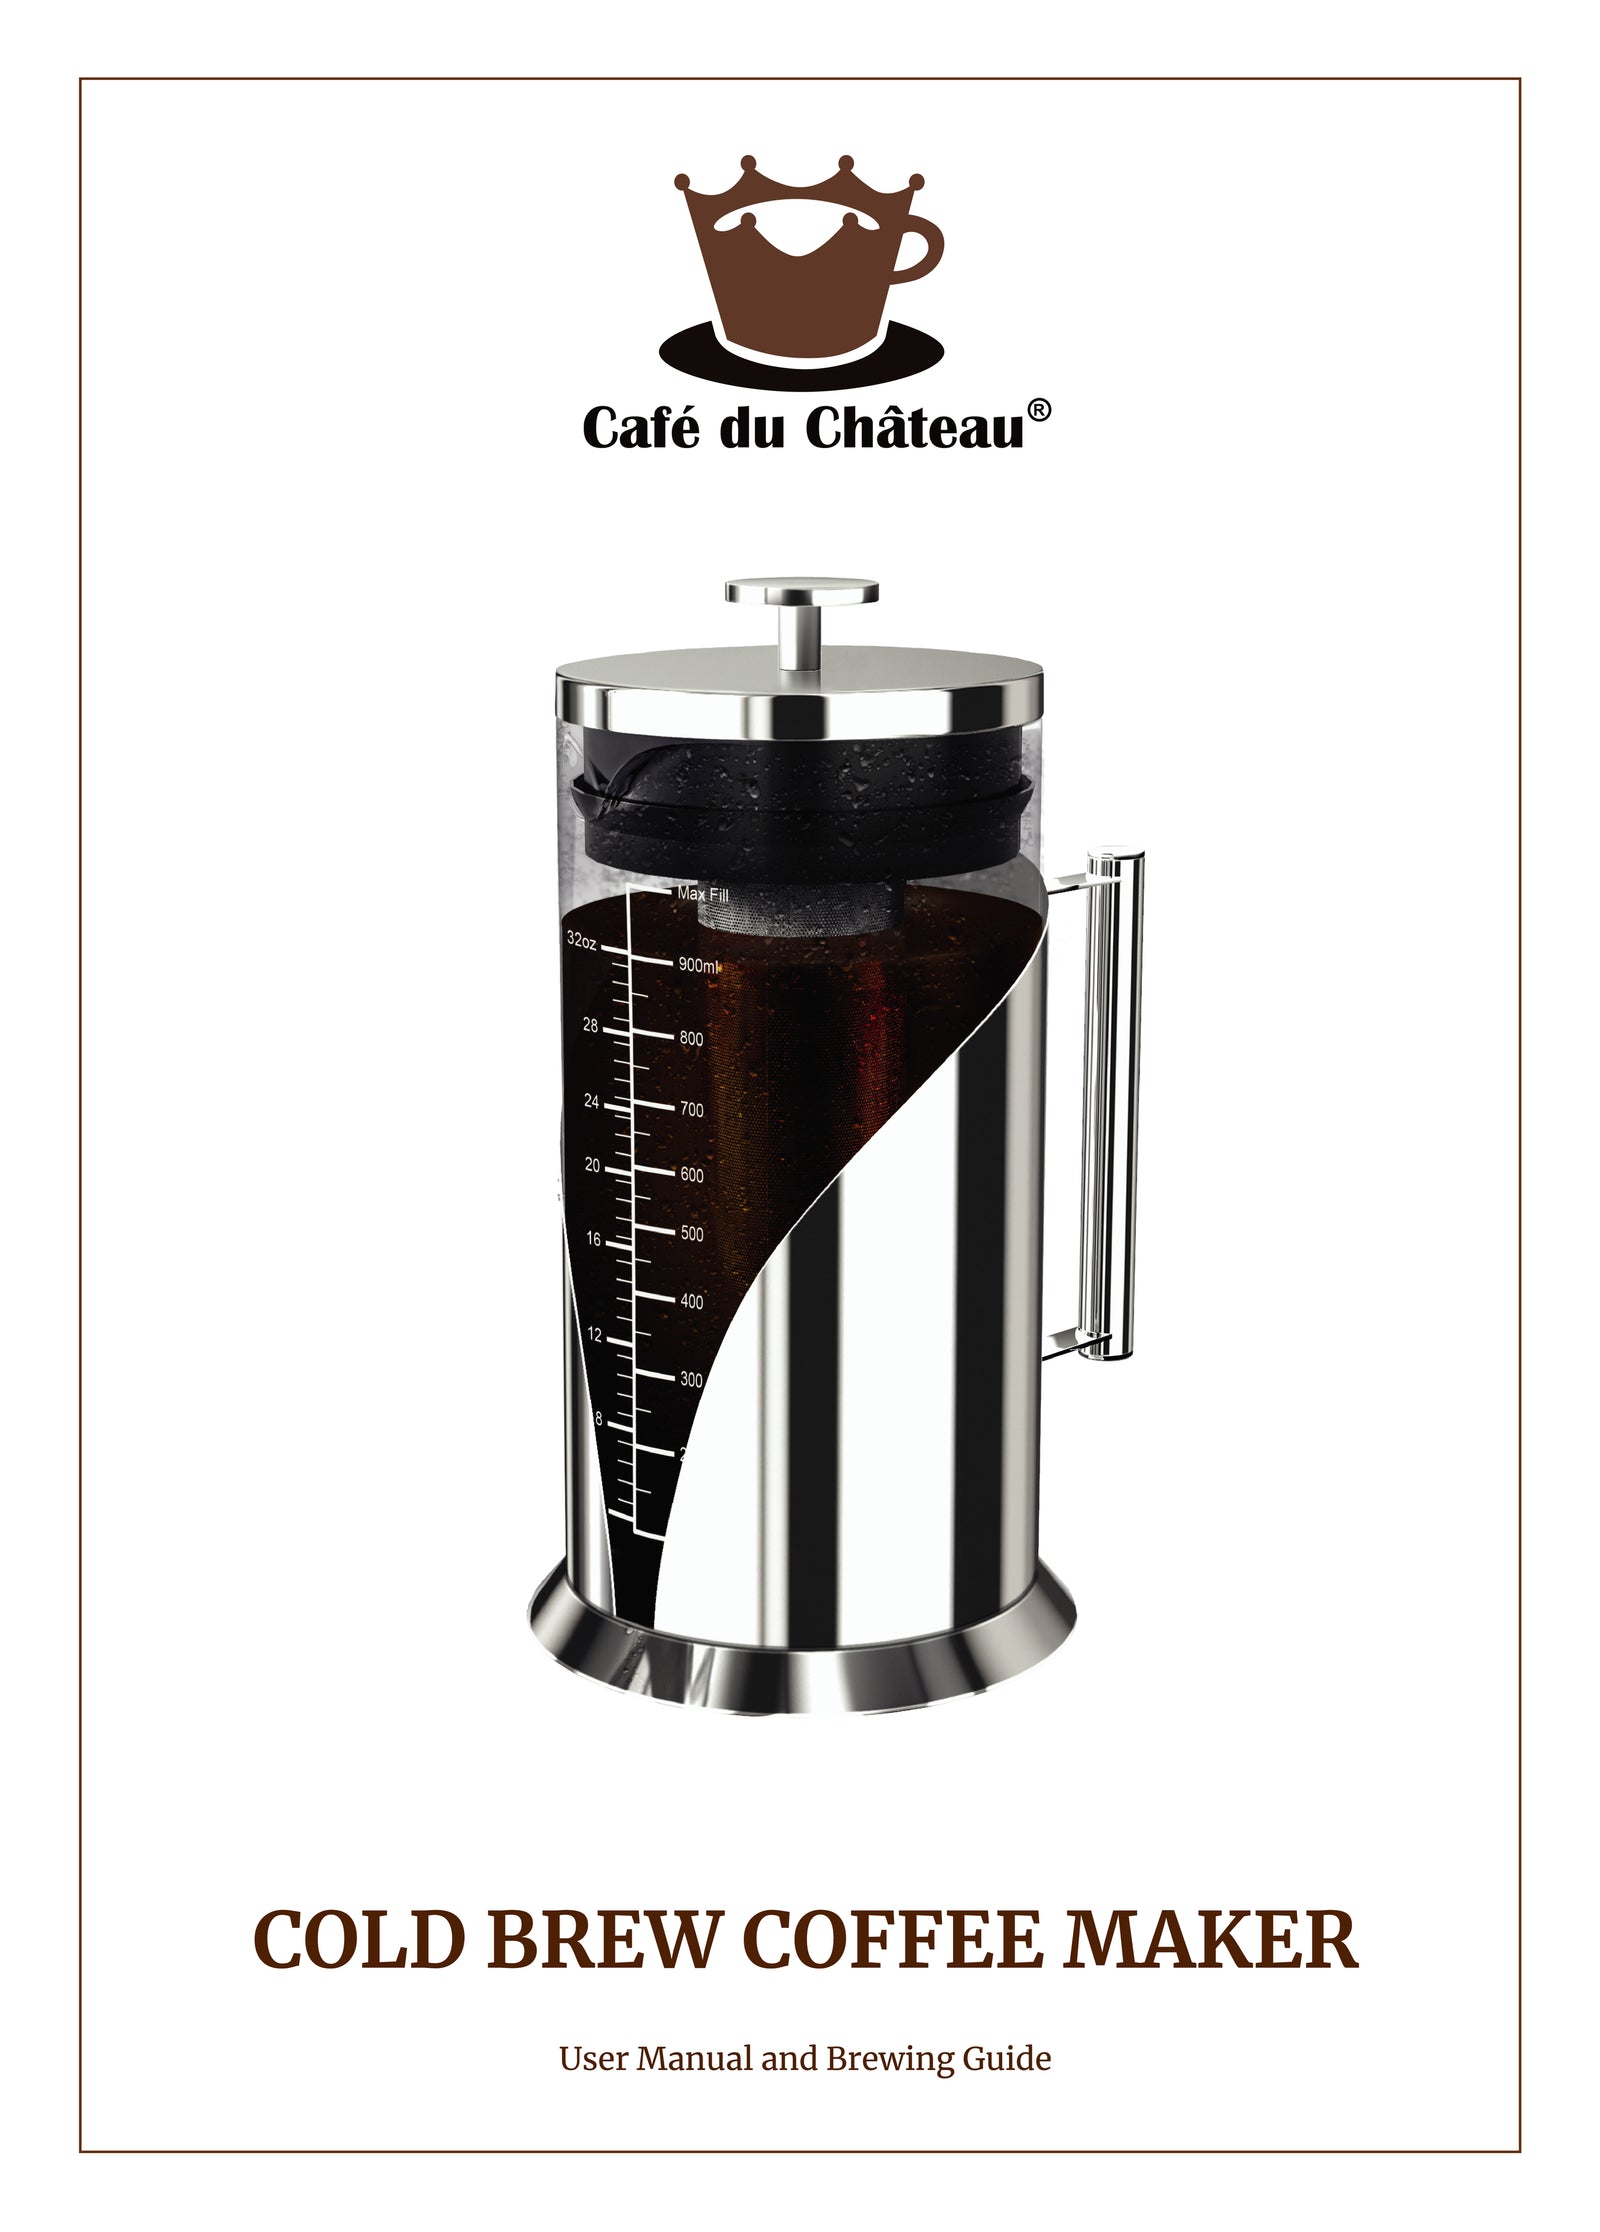 Cafe du Chateau Cold Brew Coffee Maker DEMO 